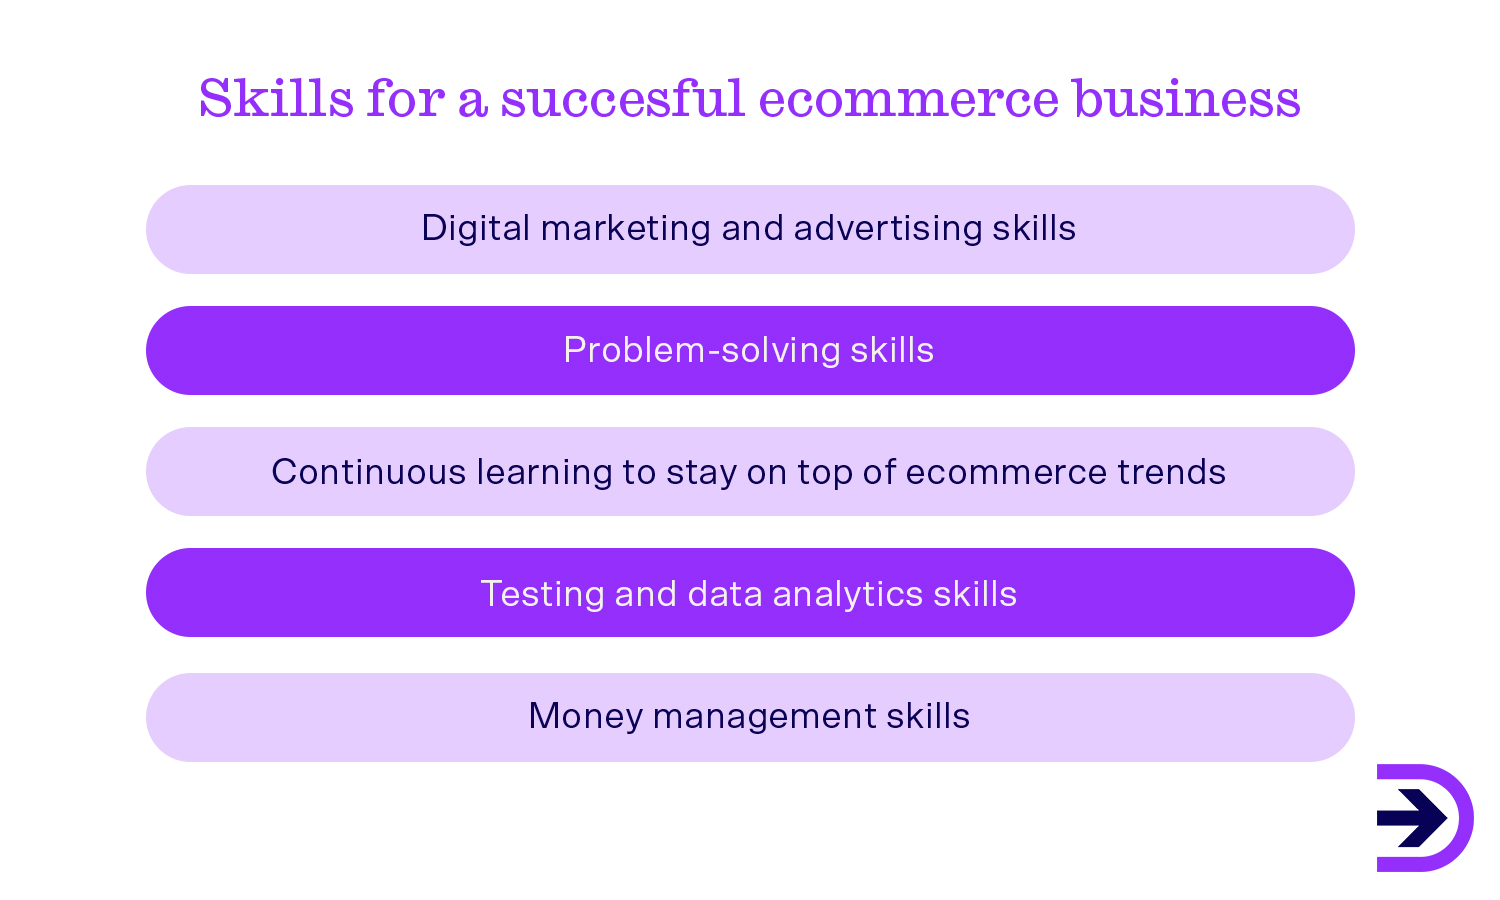 A multitude of key skills including problem-solving and analytical skills should be the focus when developing your own ecommerce business.